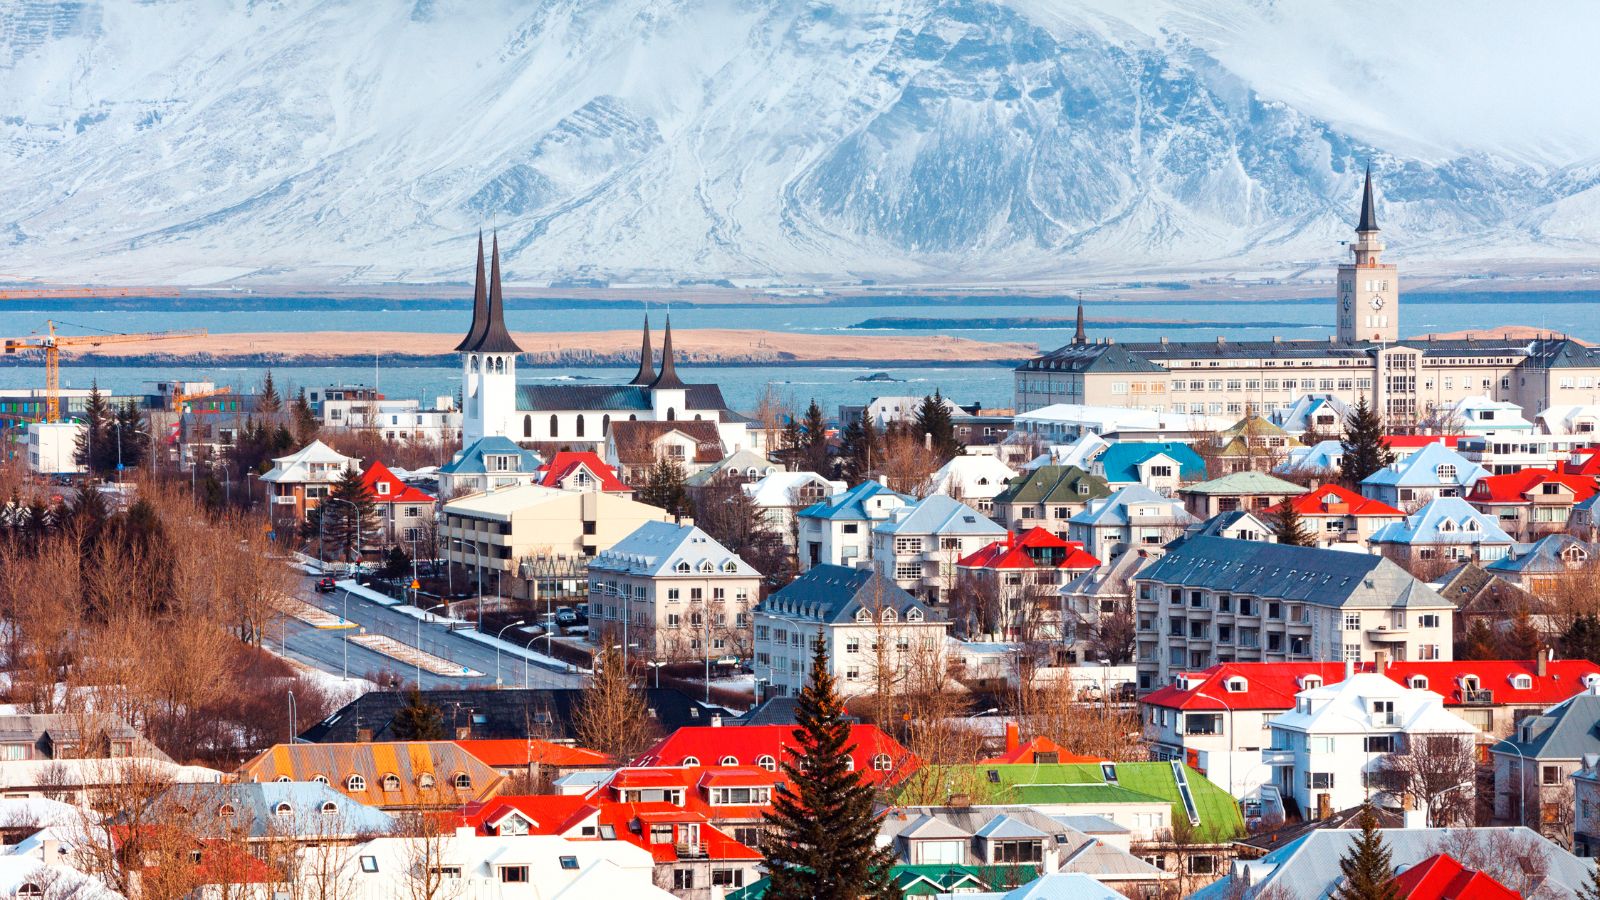 <p>Iceland is such an amazing country with so much to do and see. However, if you have only 24 hours to see the entire country, it’s probably best to stay in the country’s capital, Reykjavik.</p> <p>Icelandic Air has a great program that offers varying lengths of stopovers on your flights. You could fly from Miami to Rome, with a 24-hour stopover in Iceland, for no extra fee. </p> <p>This city is known for its museums, thermal baths, colorful buildings, and more. I narrowed down everything there is to do here to just 10 things to do on a 24-hour stopover in Reykjavik.</p>